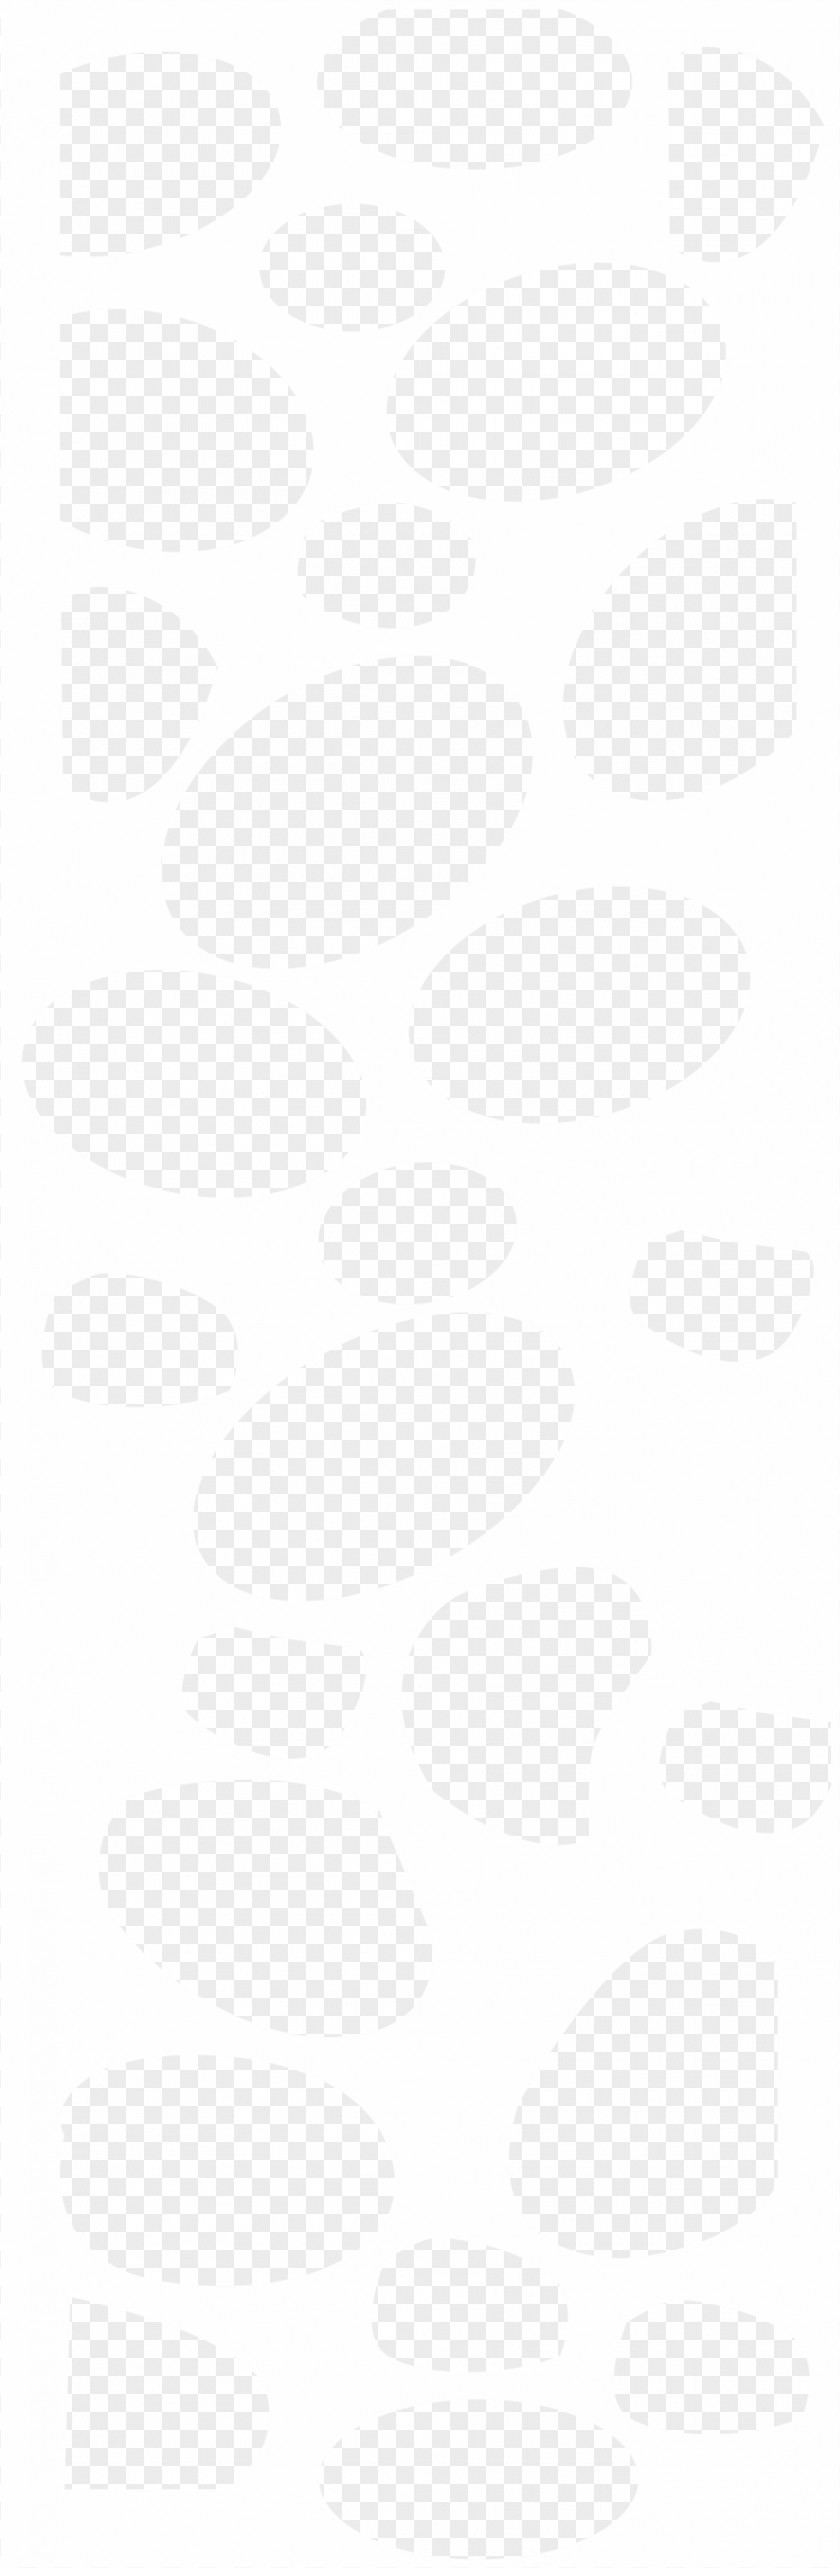 Decoration Hollow Pattern Shift Gate White Black Area PNG